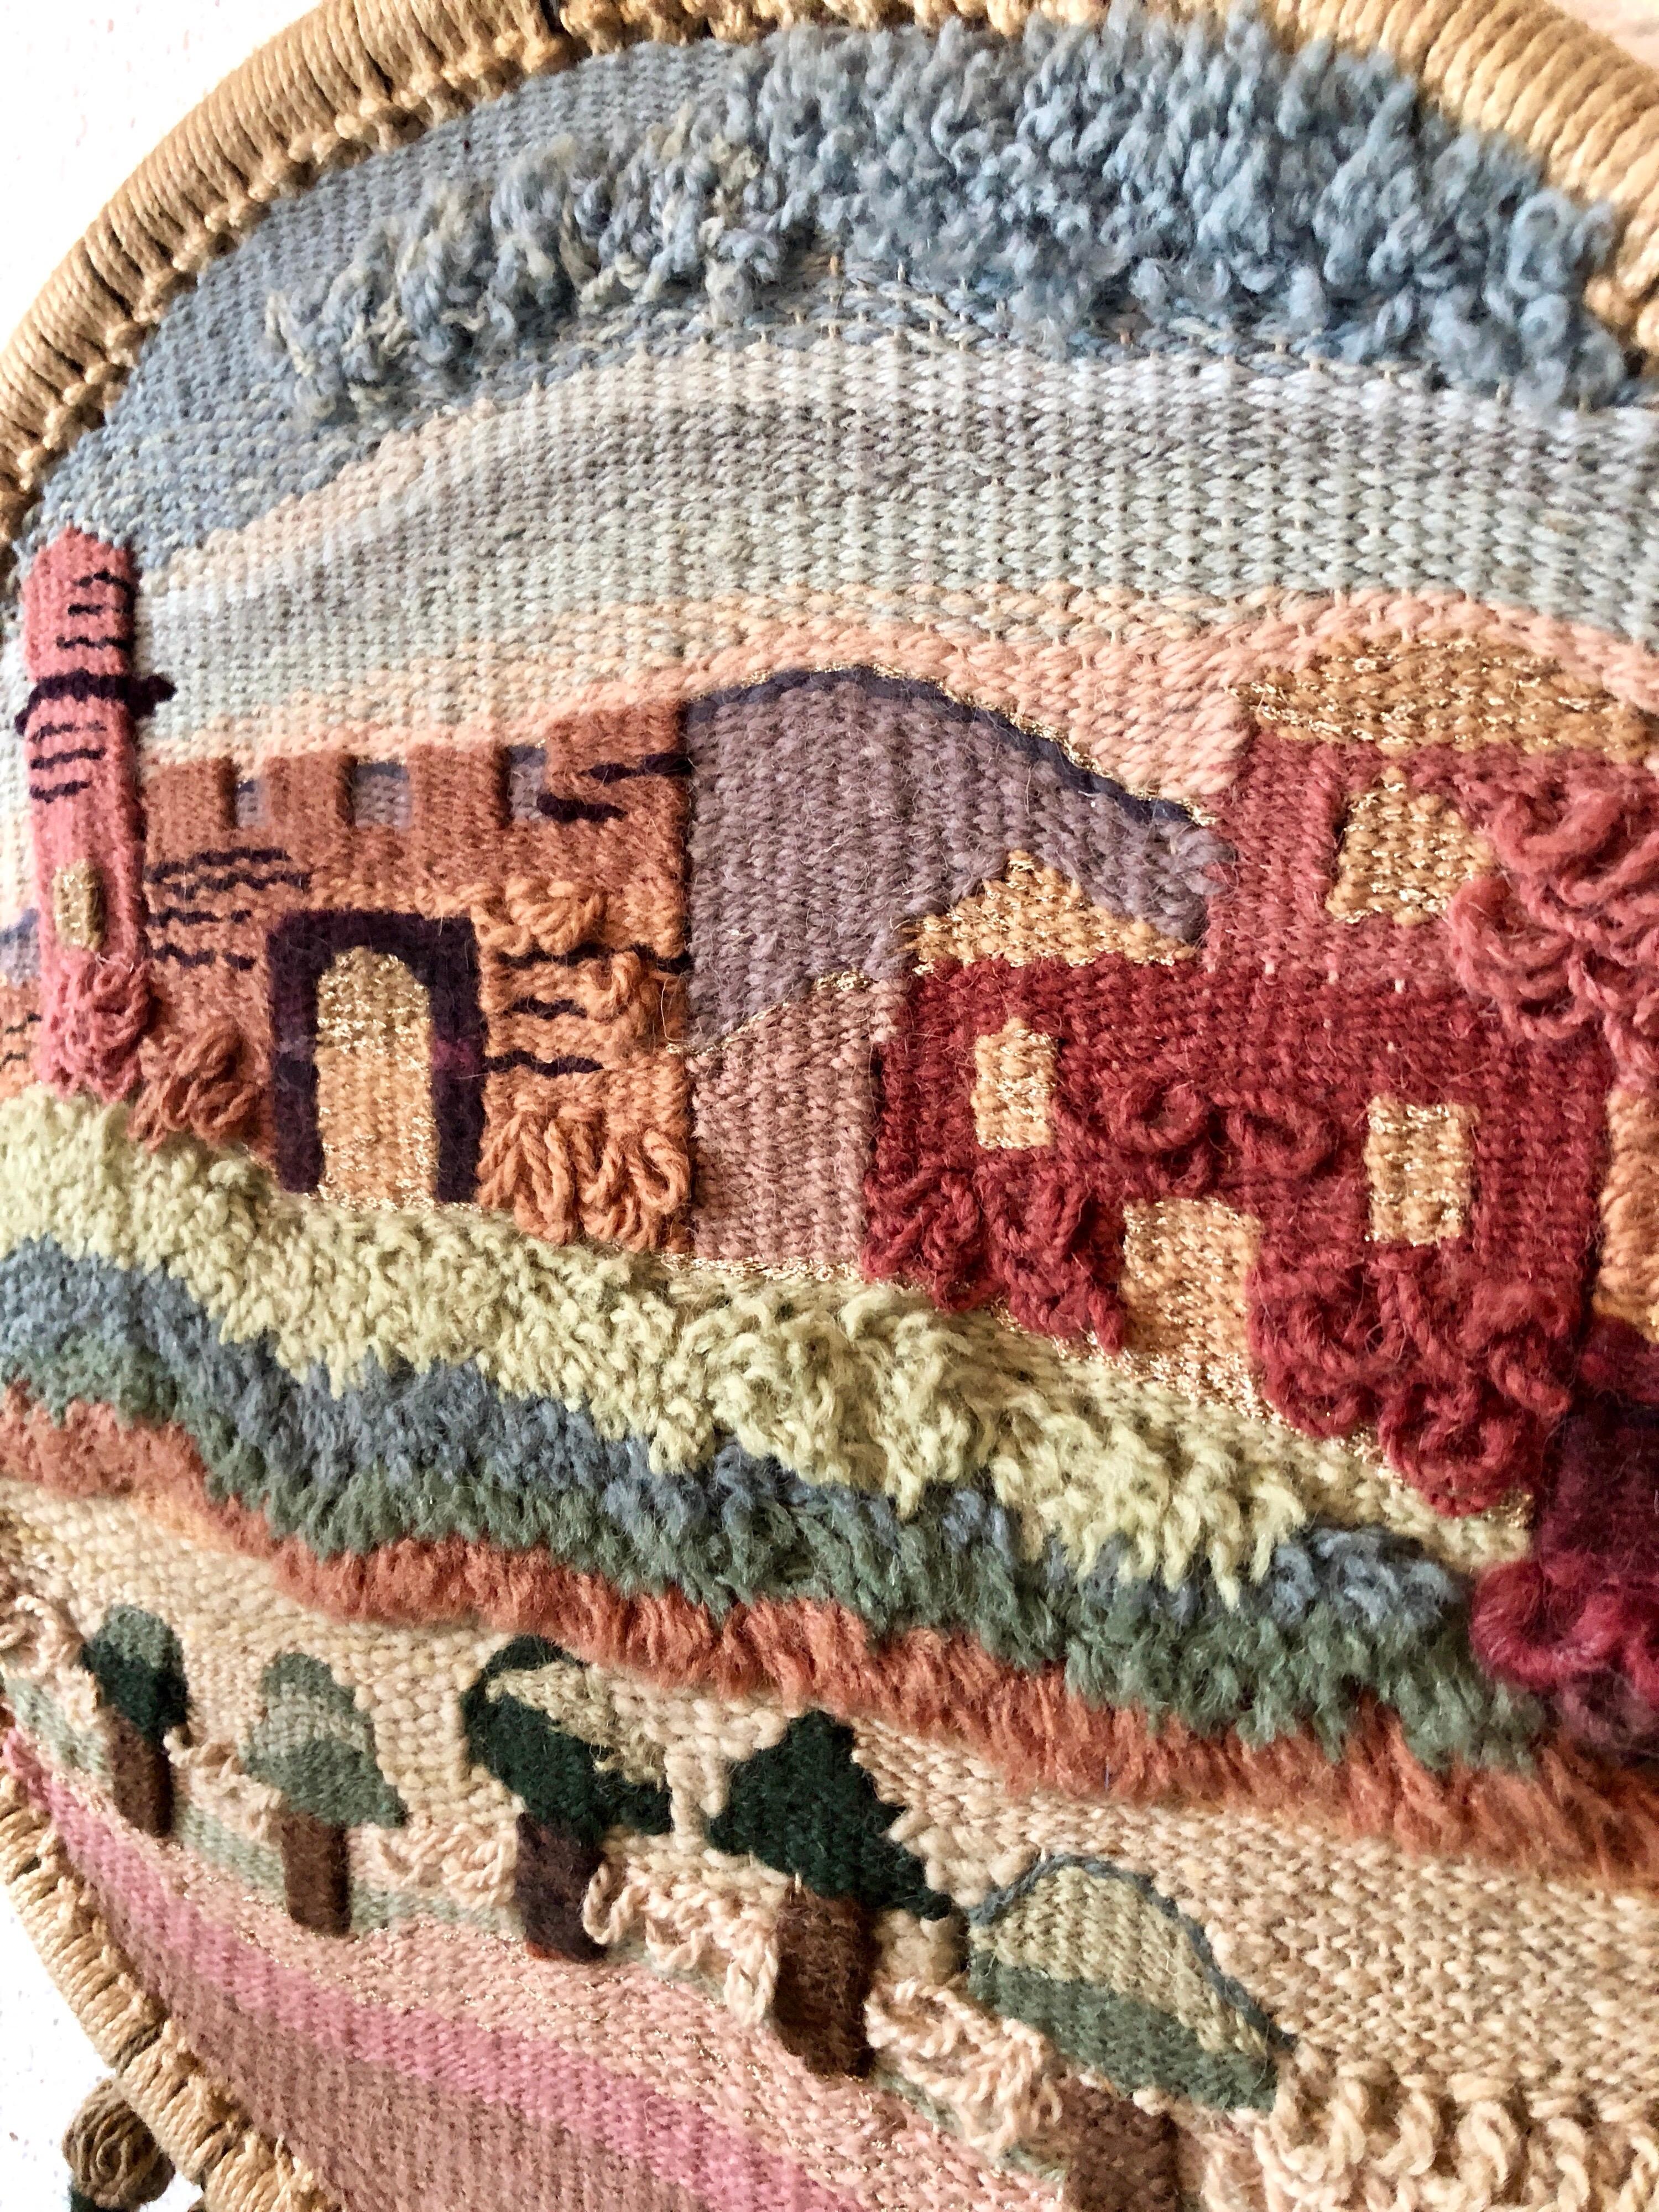 This is an artistic weaving depicting the old city of Jerusalem. Signed in Hebrew and dated verso. it is all Hand Woven.
Esther Bensimon is a native of Argentina. She graduated from the Teacher’s College of Yeshiva University in New York City and